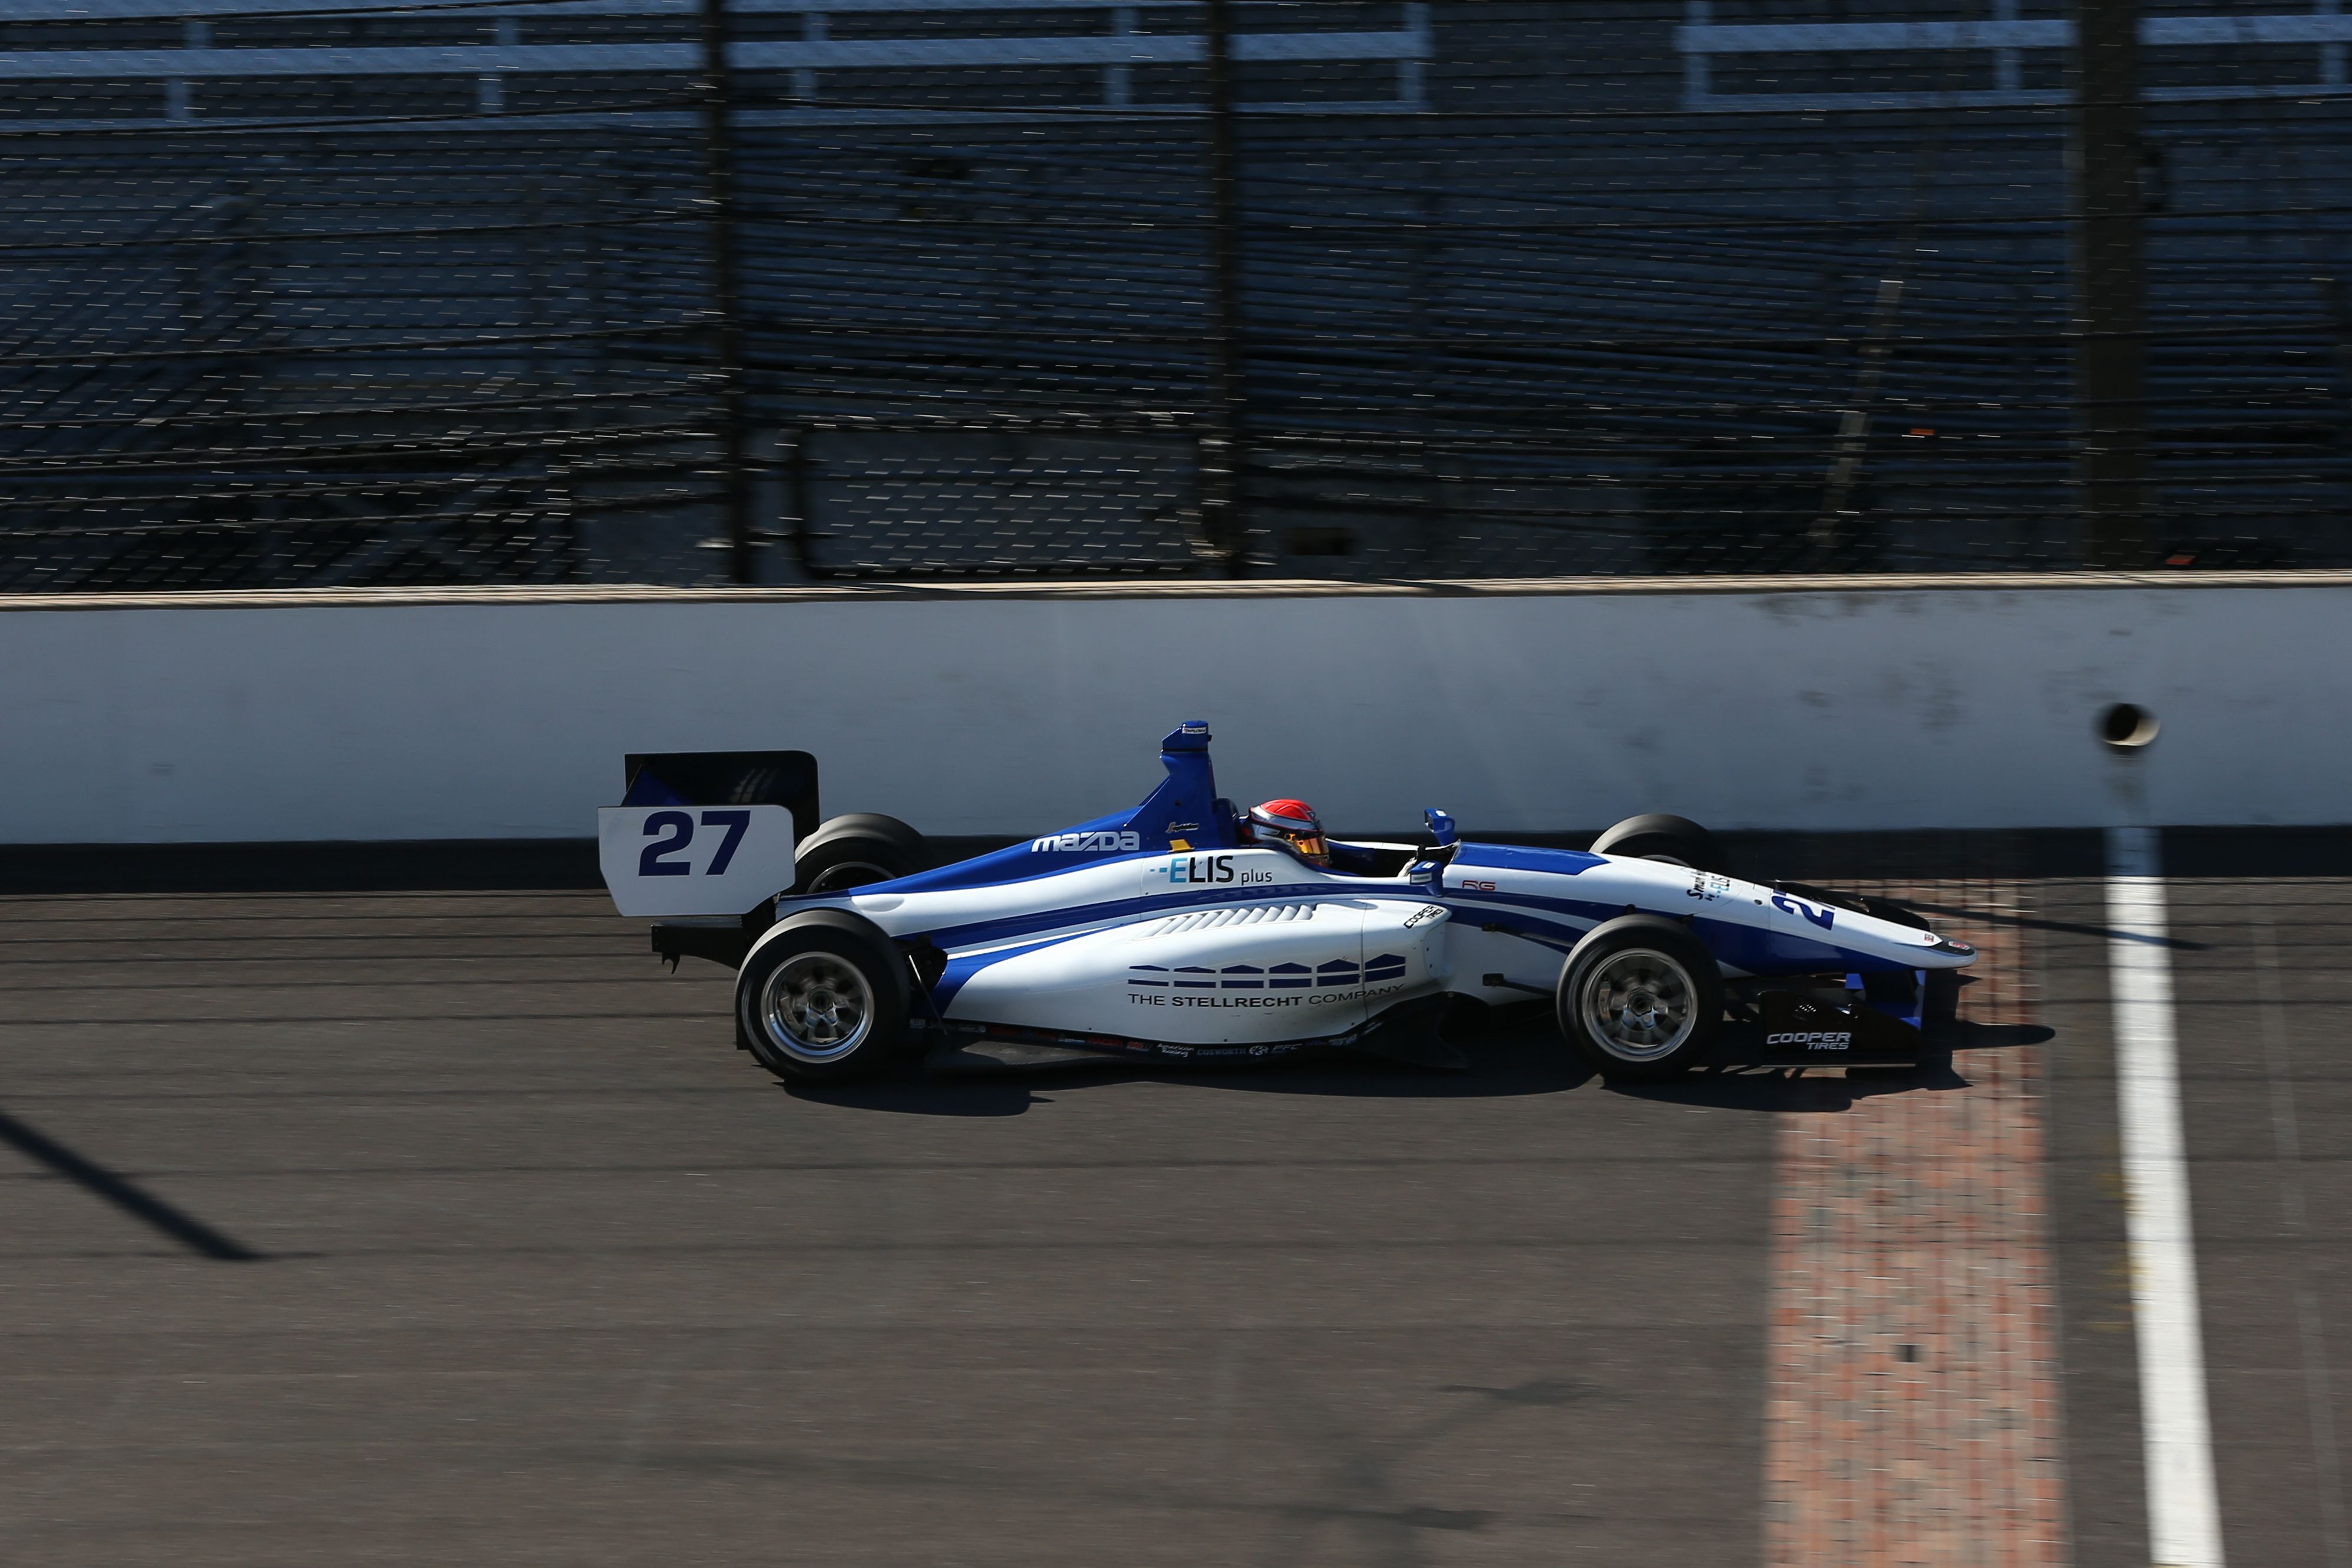 Ryan Norman joins Indy Lights with Andretti Autosport